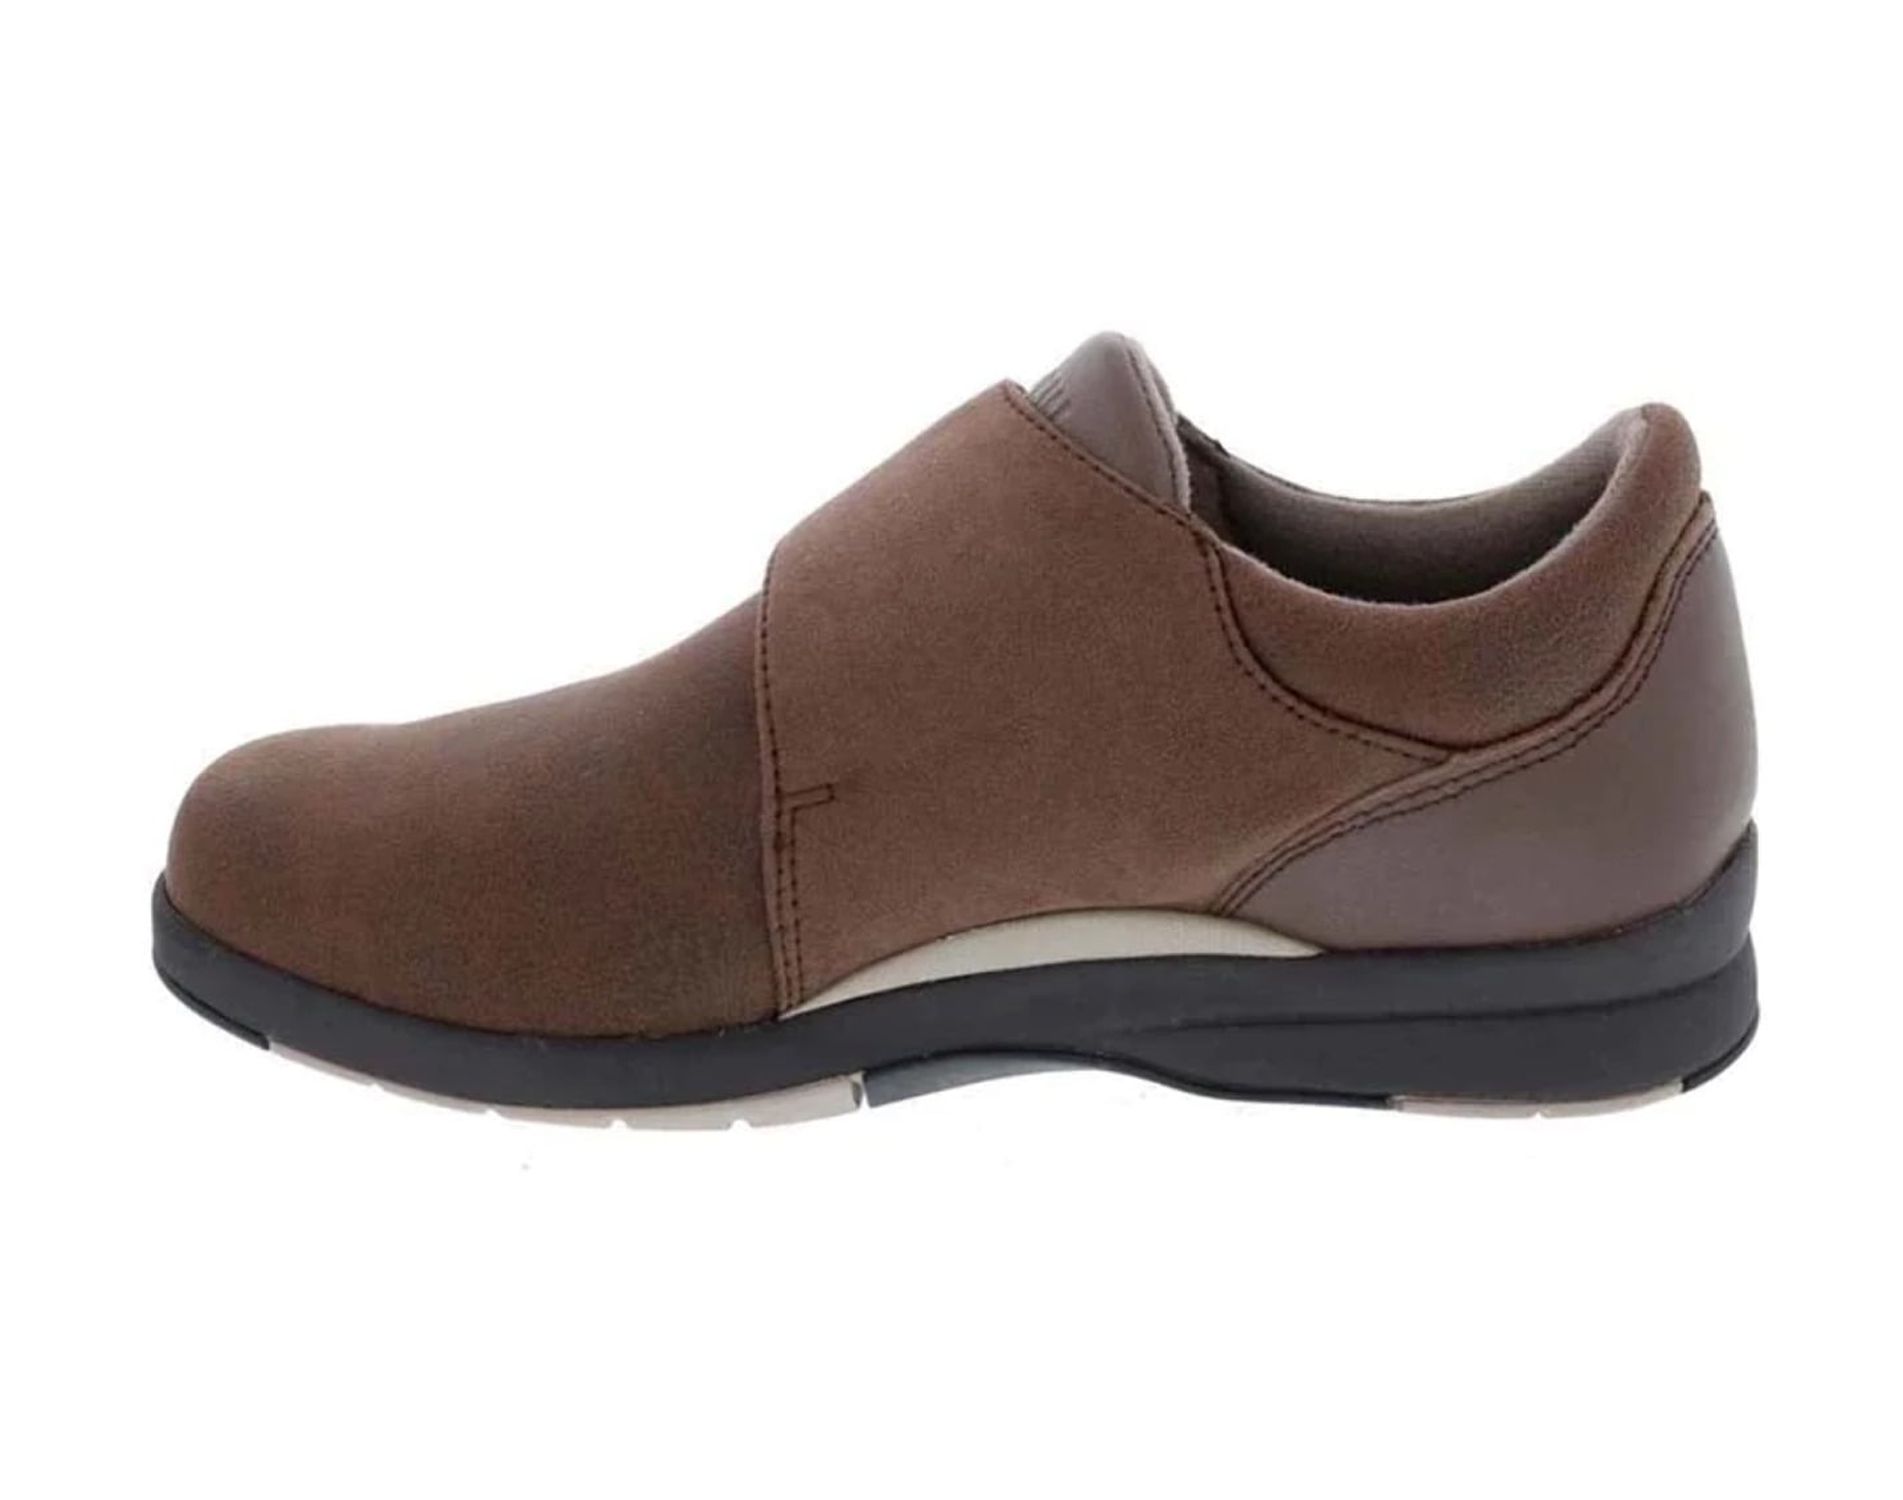 DREW MOONWALK WOMEN CASUAL SHOE IN BROWN STRETCH LEATHER - image 2 of 5